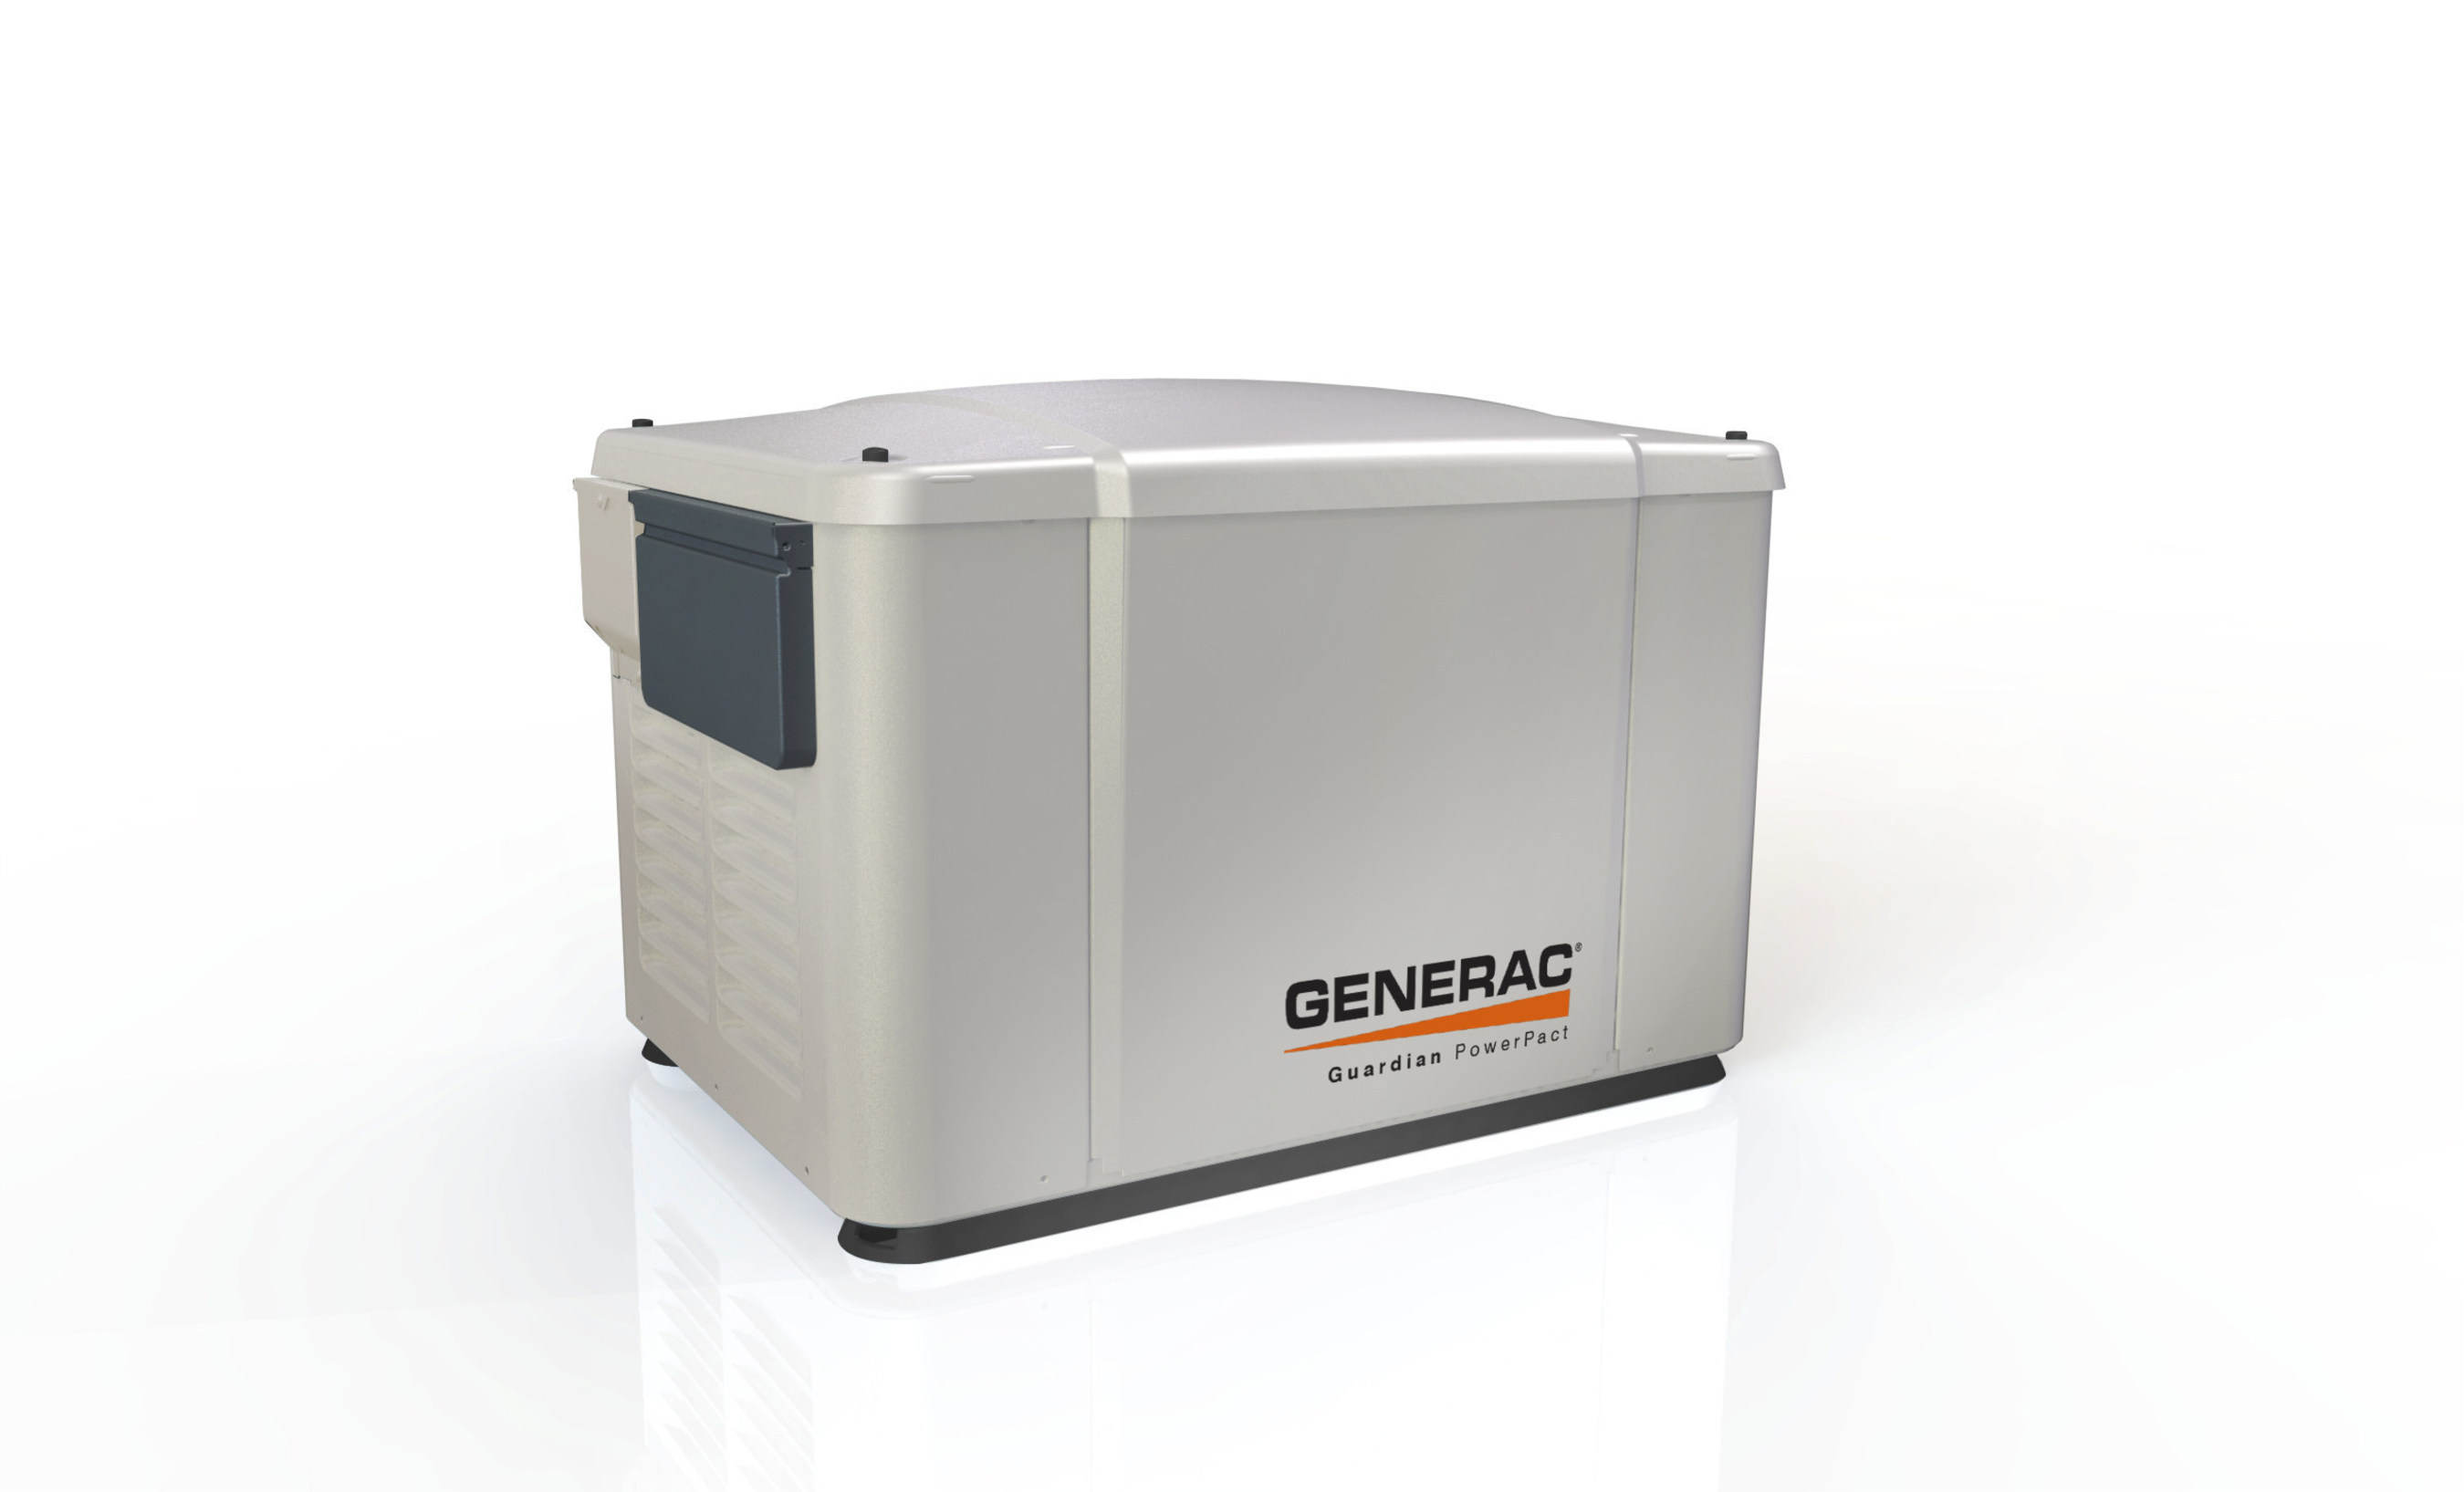 New Generac PowerPact Generator Now Available for Sale